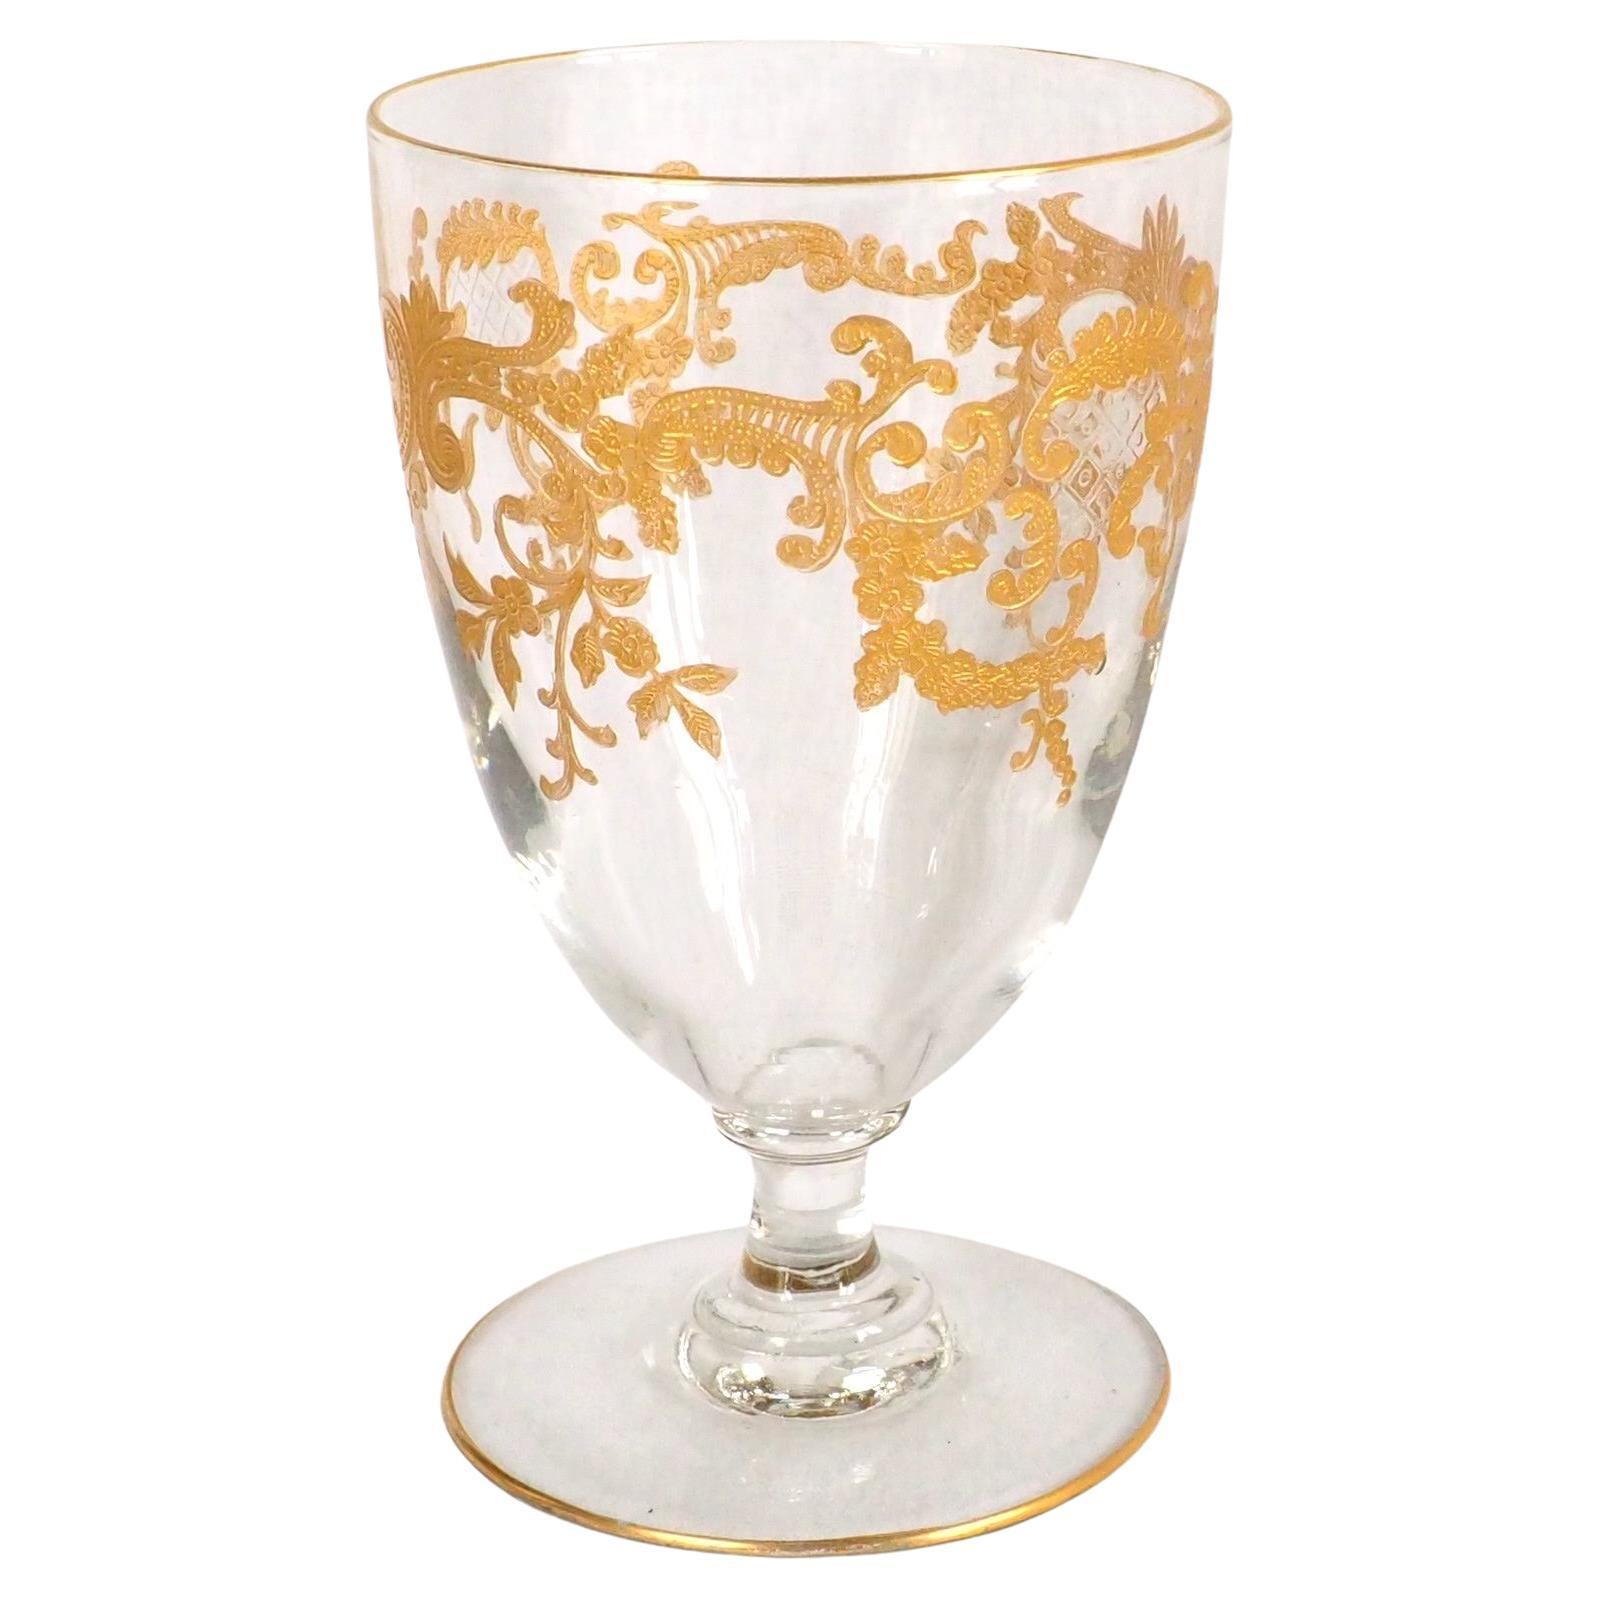 Baccarat Crystal water glass, Clear Crystal enhanced with fine gold